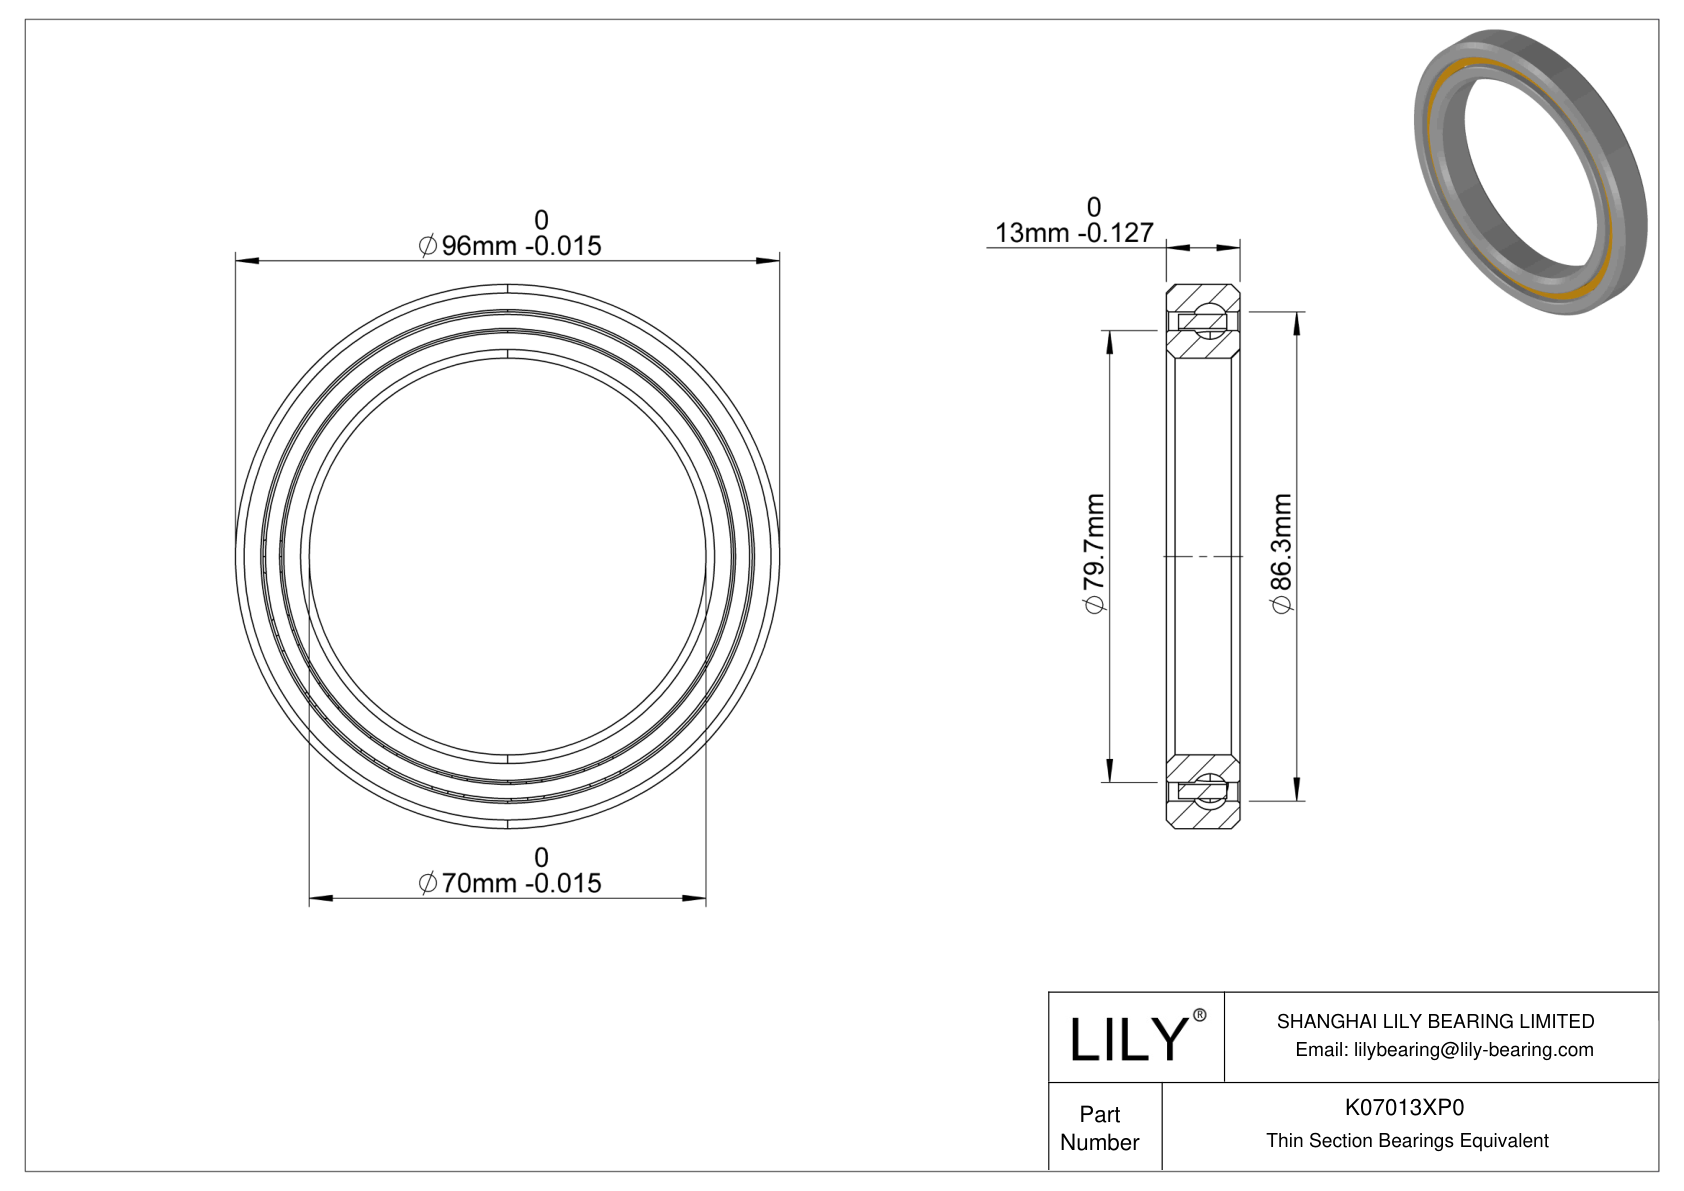 K07013XP0 Constant Section (CS) Bearings cad drawing